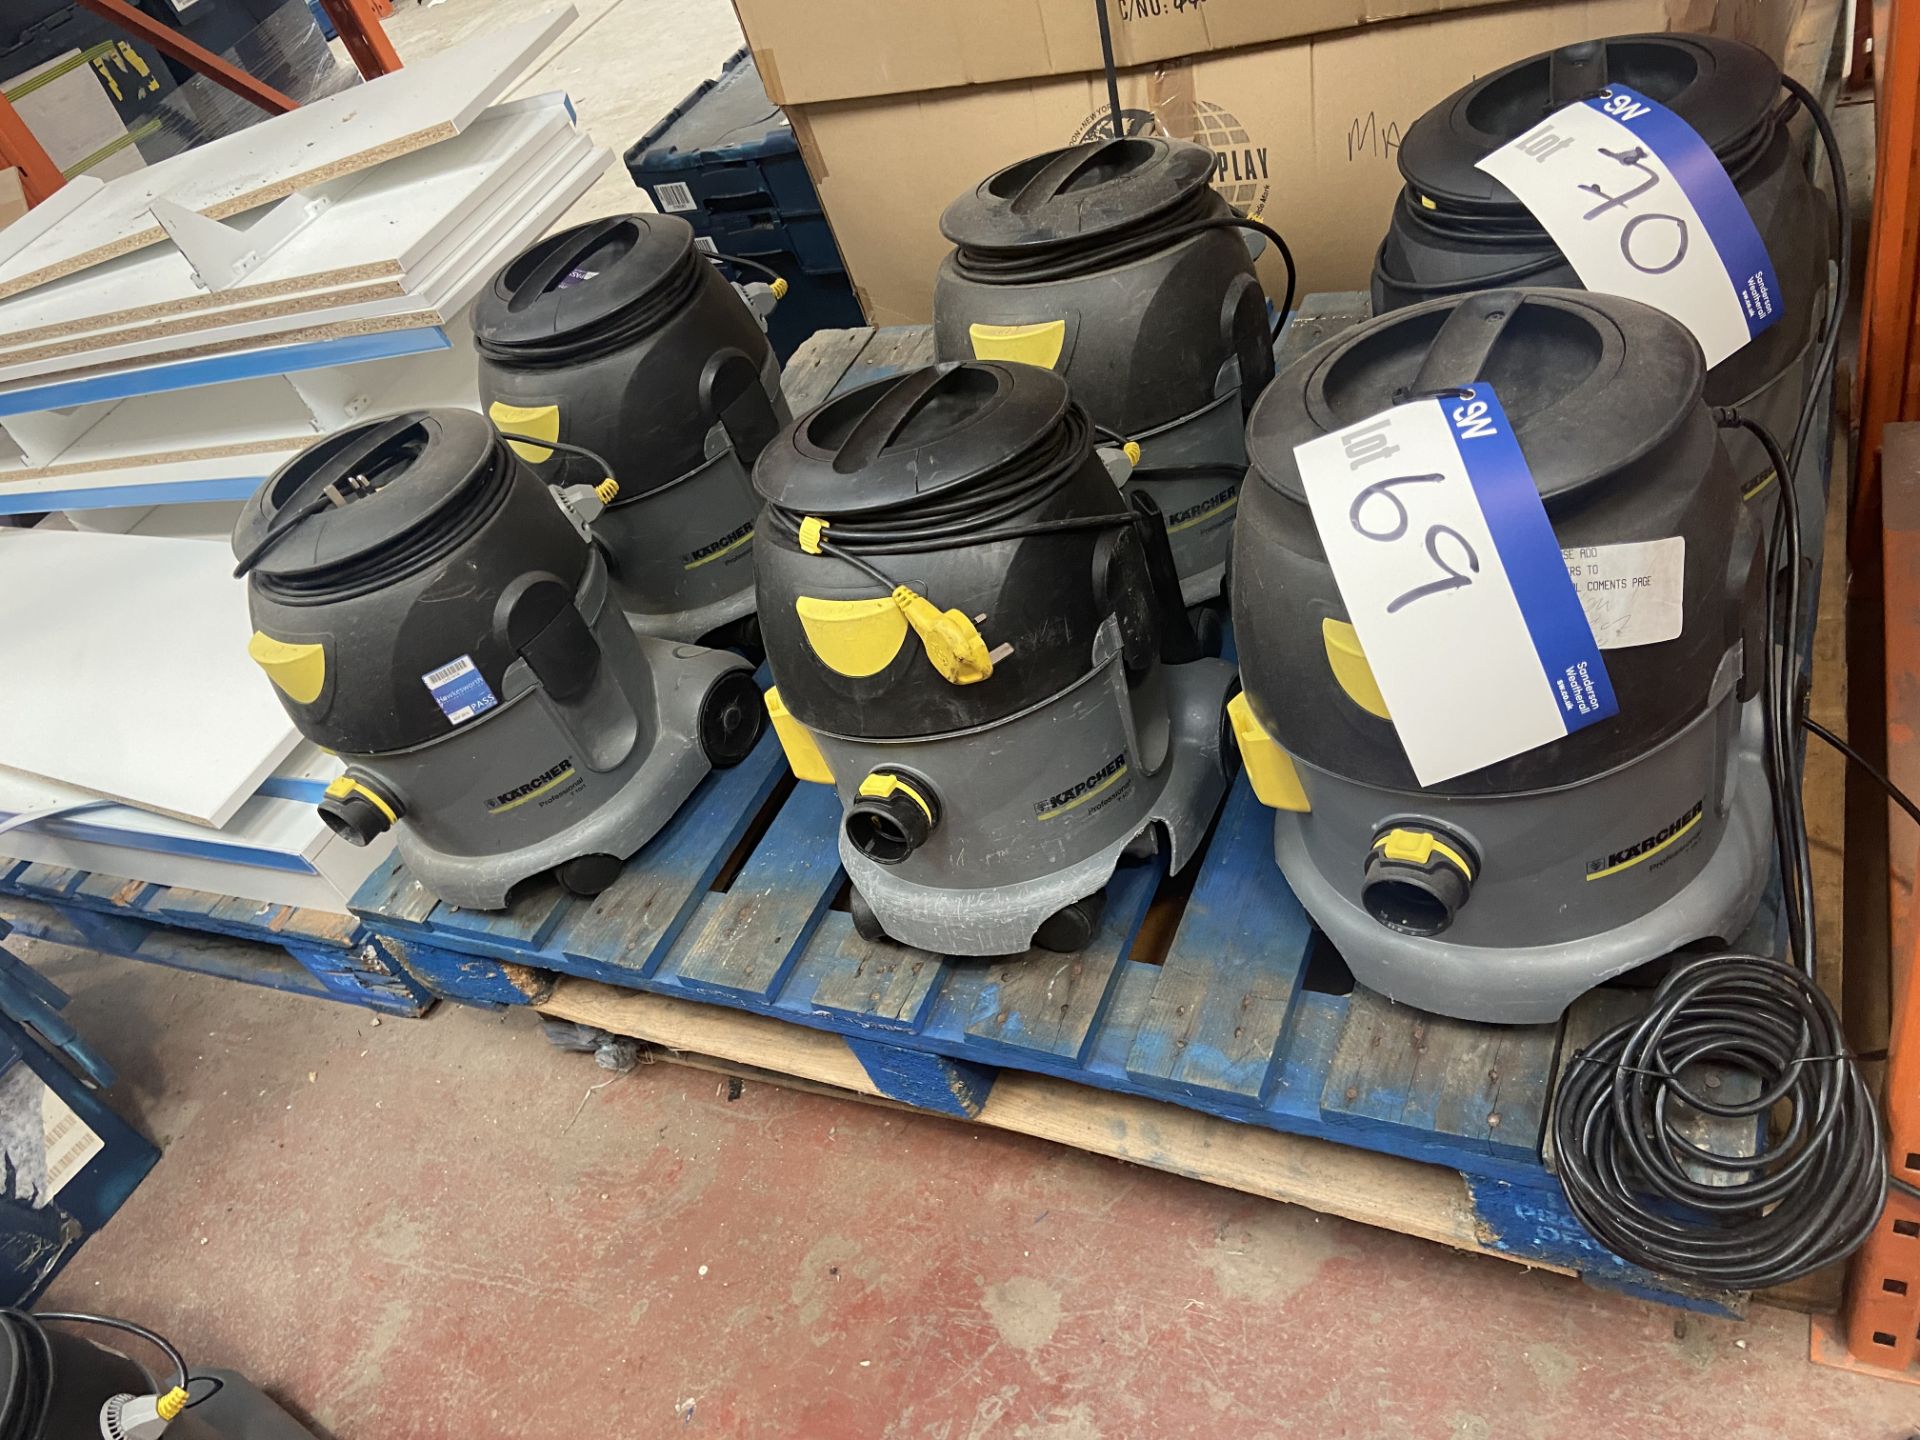 Three Portable Electric Vacuum Cleaners (no hoses), Lot located 33-37 Carron Place, East Kilbride,